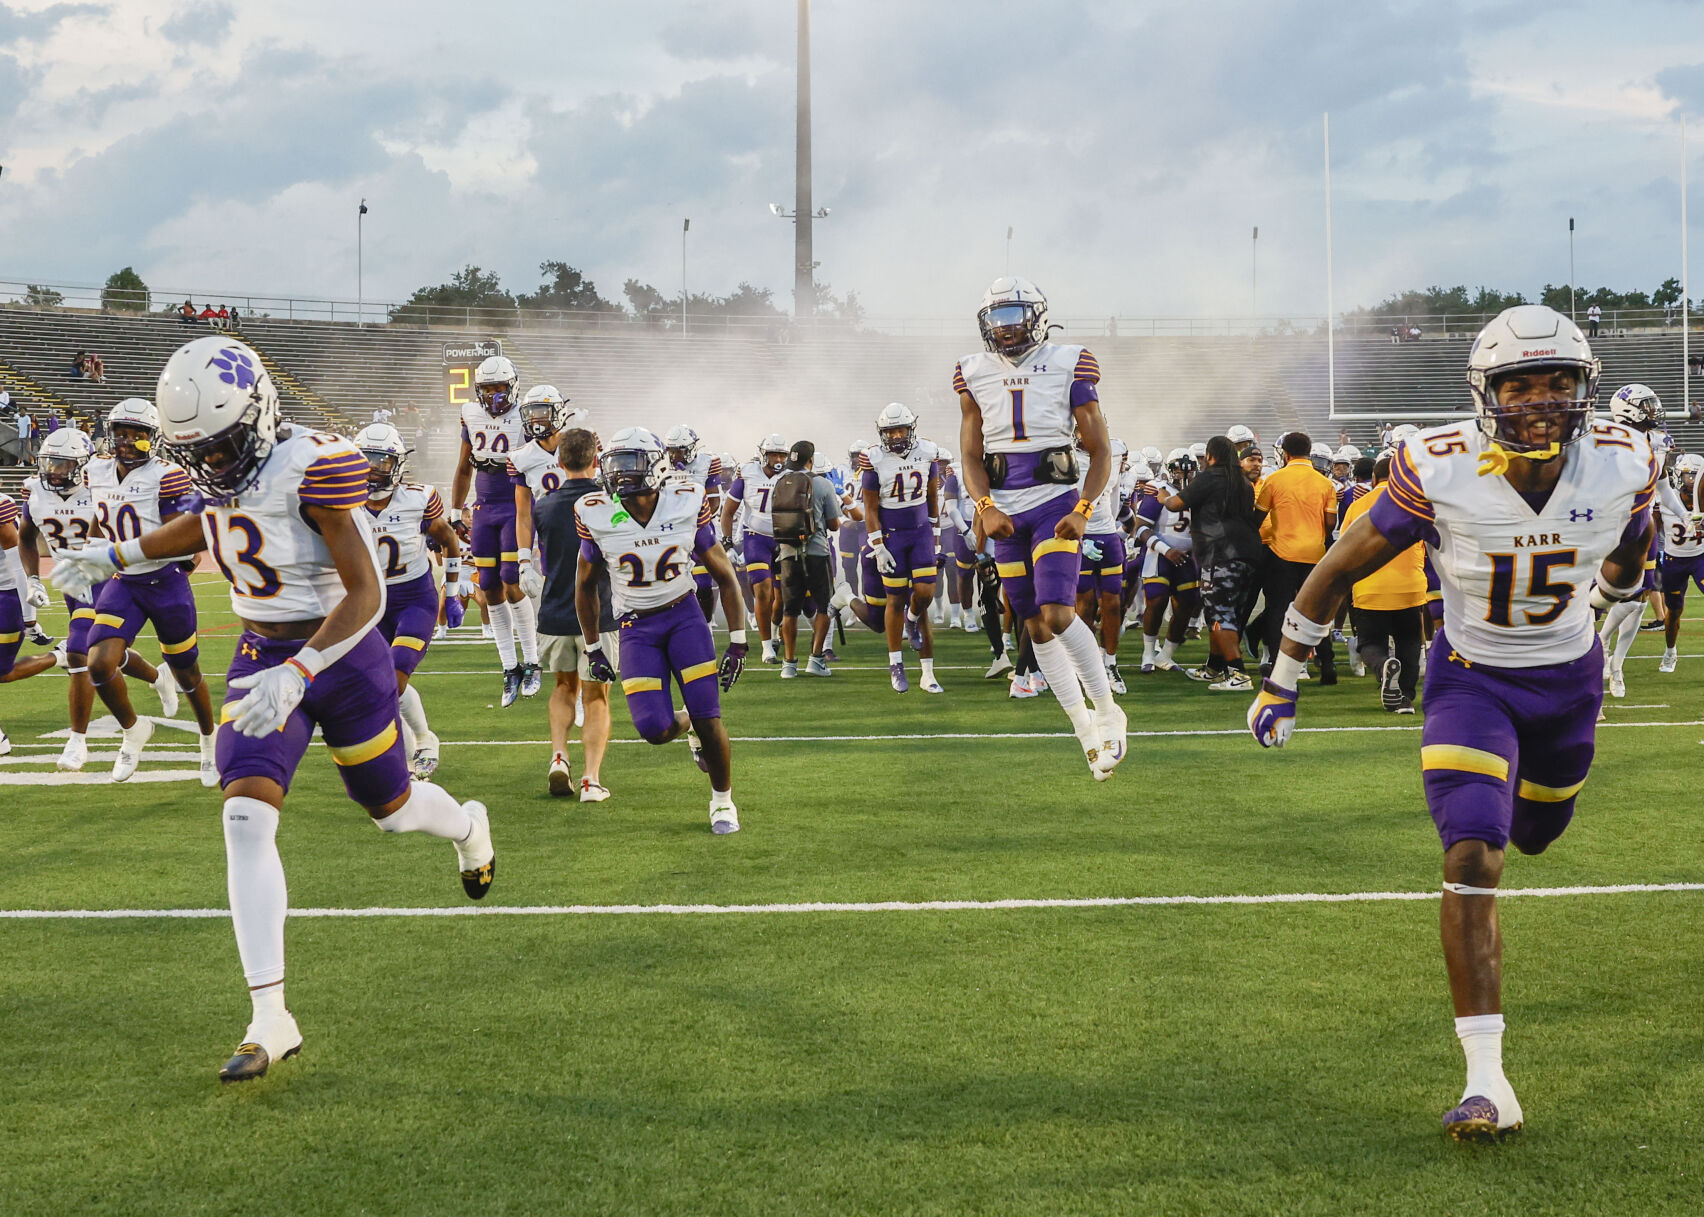 Edna Karr Could Be Moved from Catholic League in LHSAA District Reclassification